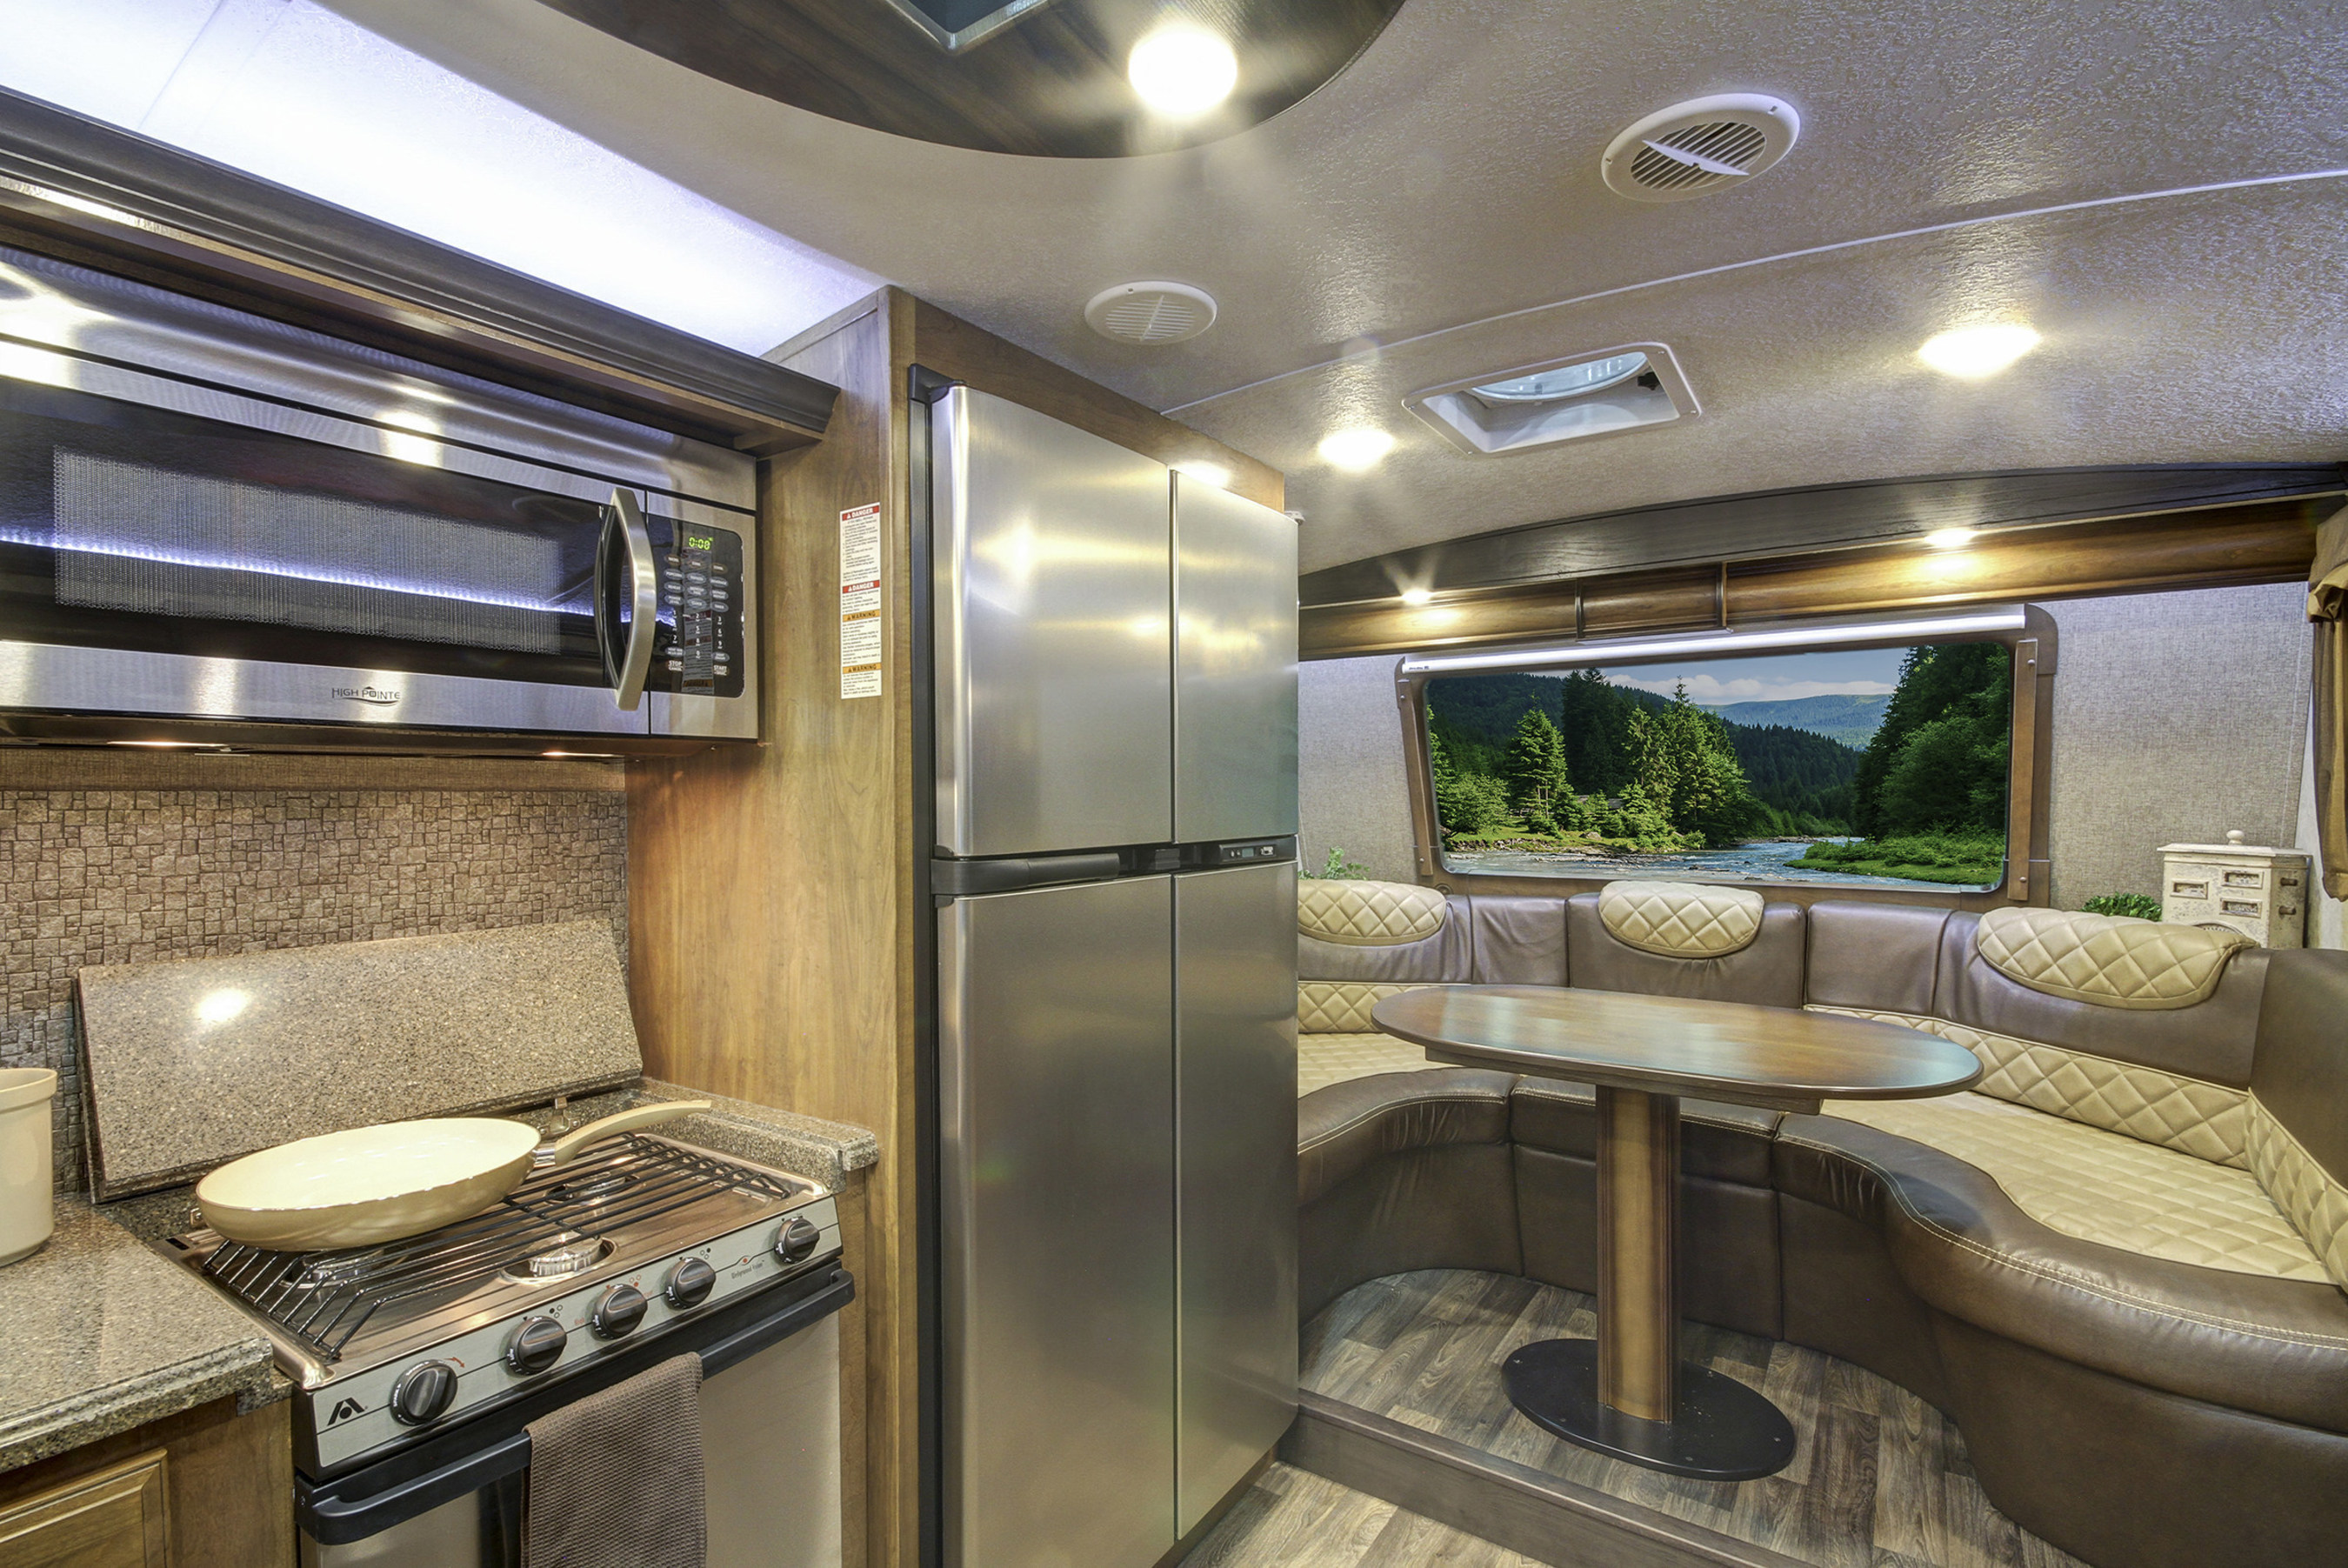 Keystones One Of A Kind Front Kitchen Montana Named 2016 RV Of The Year To Be Featured On National TV